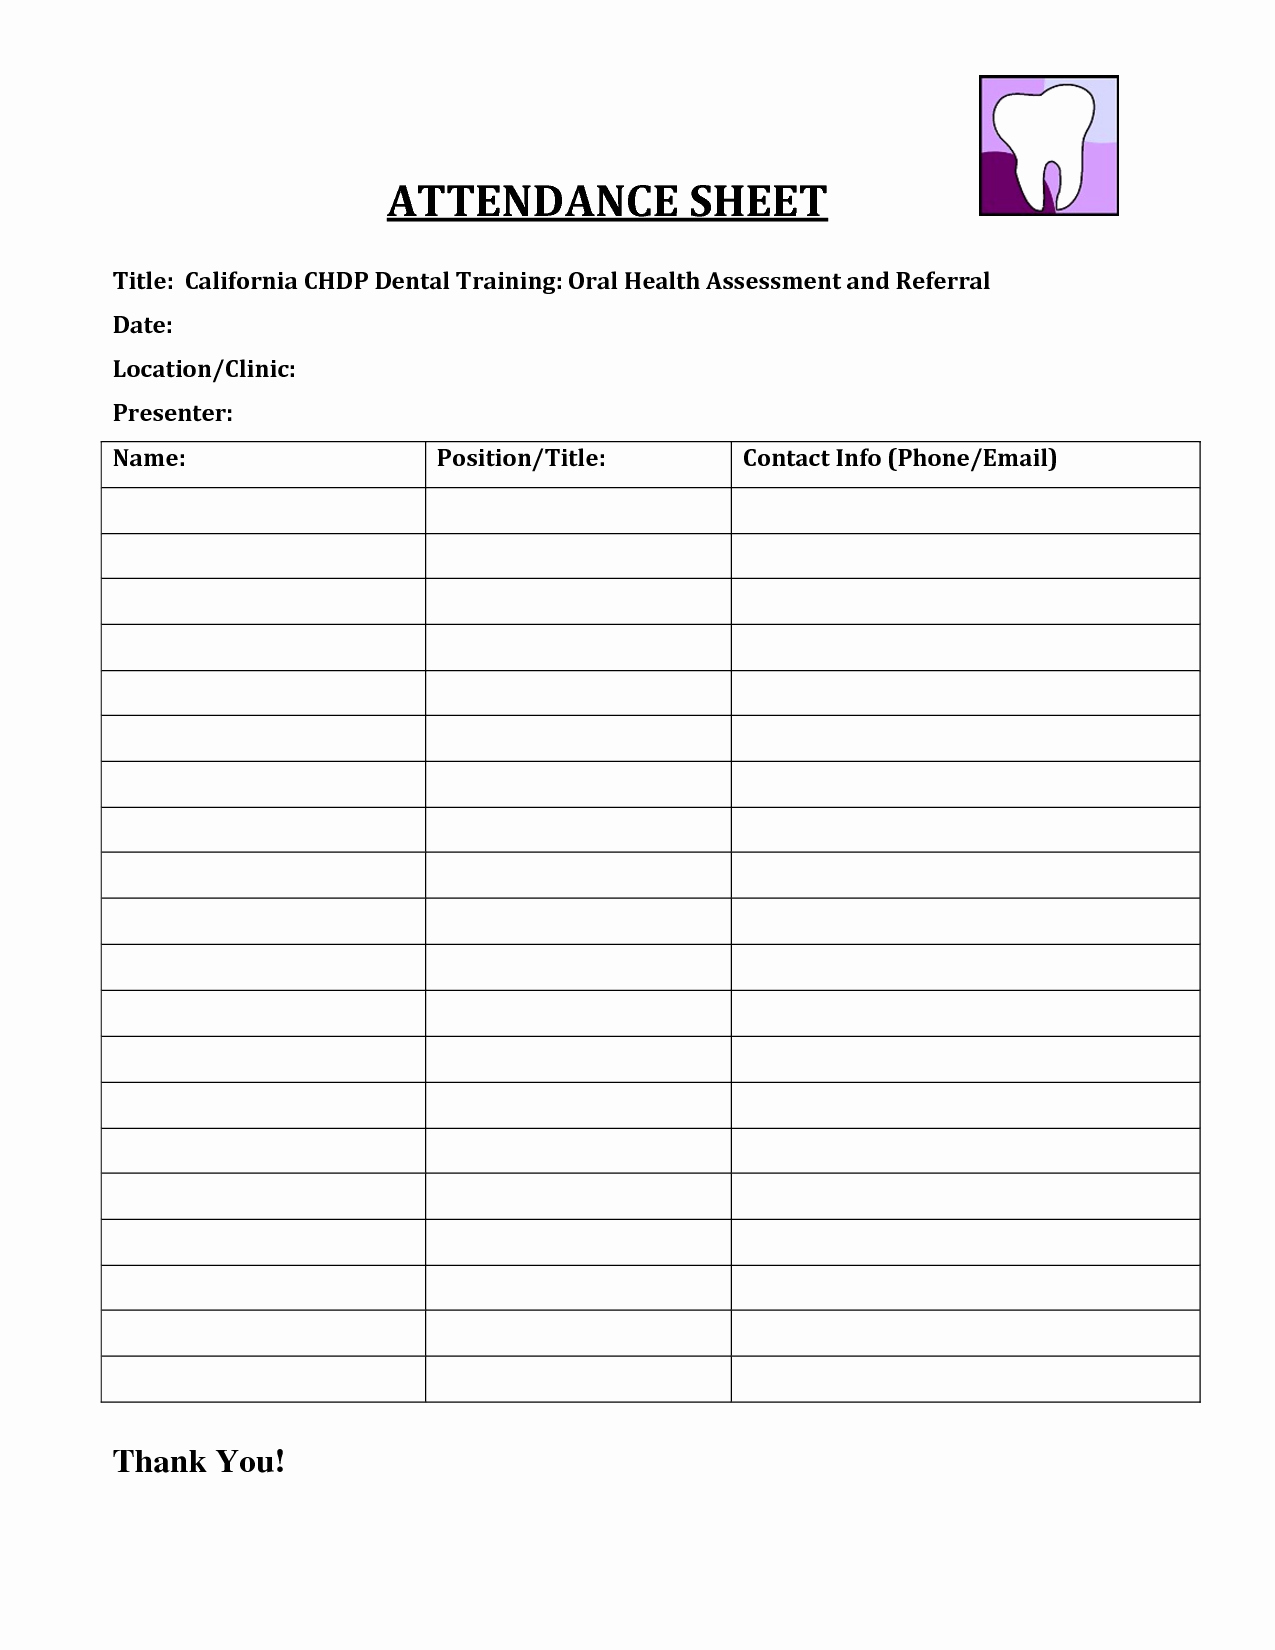 Example Of Sign In Sheet Best Of Sample Training Sign In Sheet Staruptalent